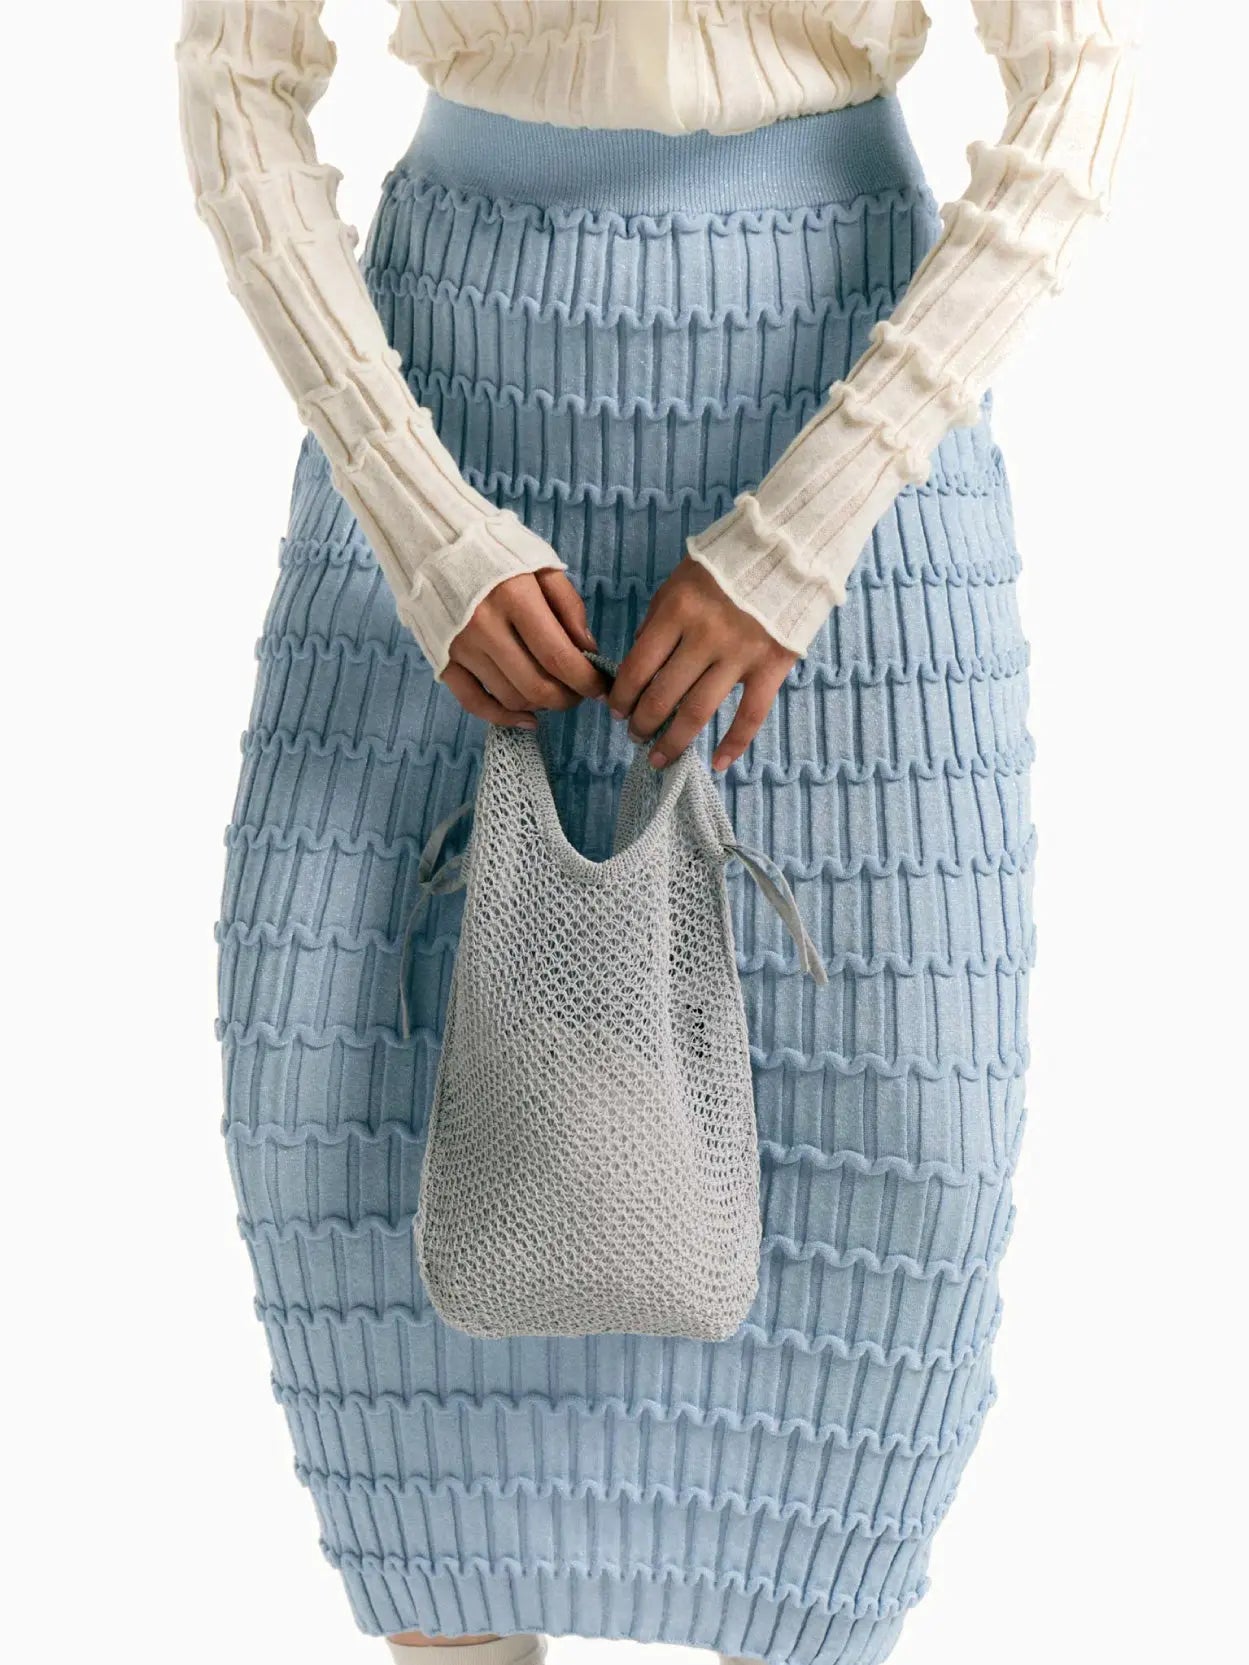 A Rus Mizuki Skirt Light Blue, knitted with a ribbed, wavy texture pattern from Bassalstore. The form-fitting skirt features an elastic waistband for a snug fit and boasts a knee-length design, displayed beautifully on a plain white background. Perfect for your next visit to Barcelona!